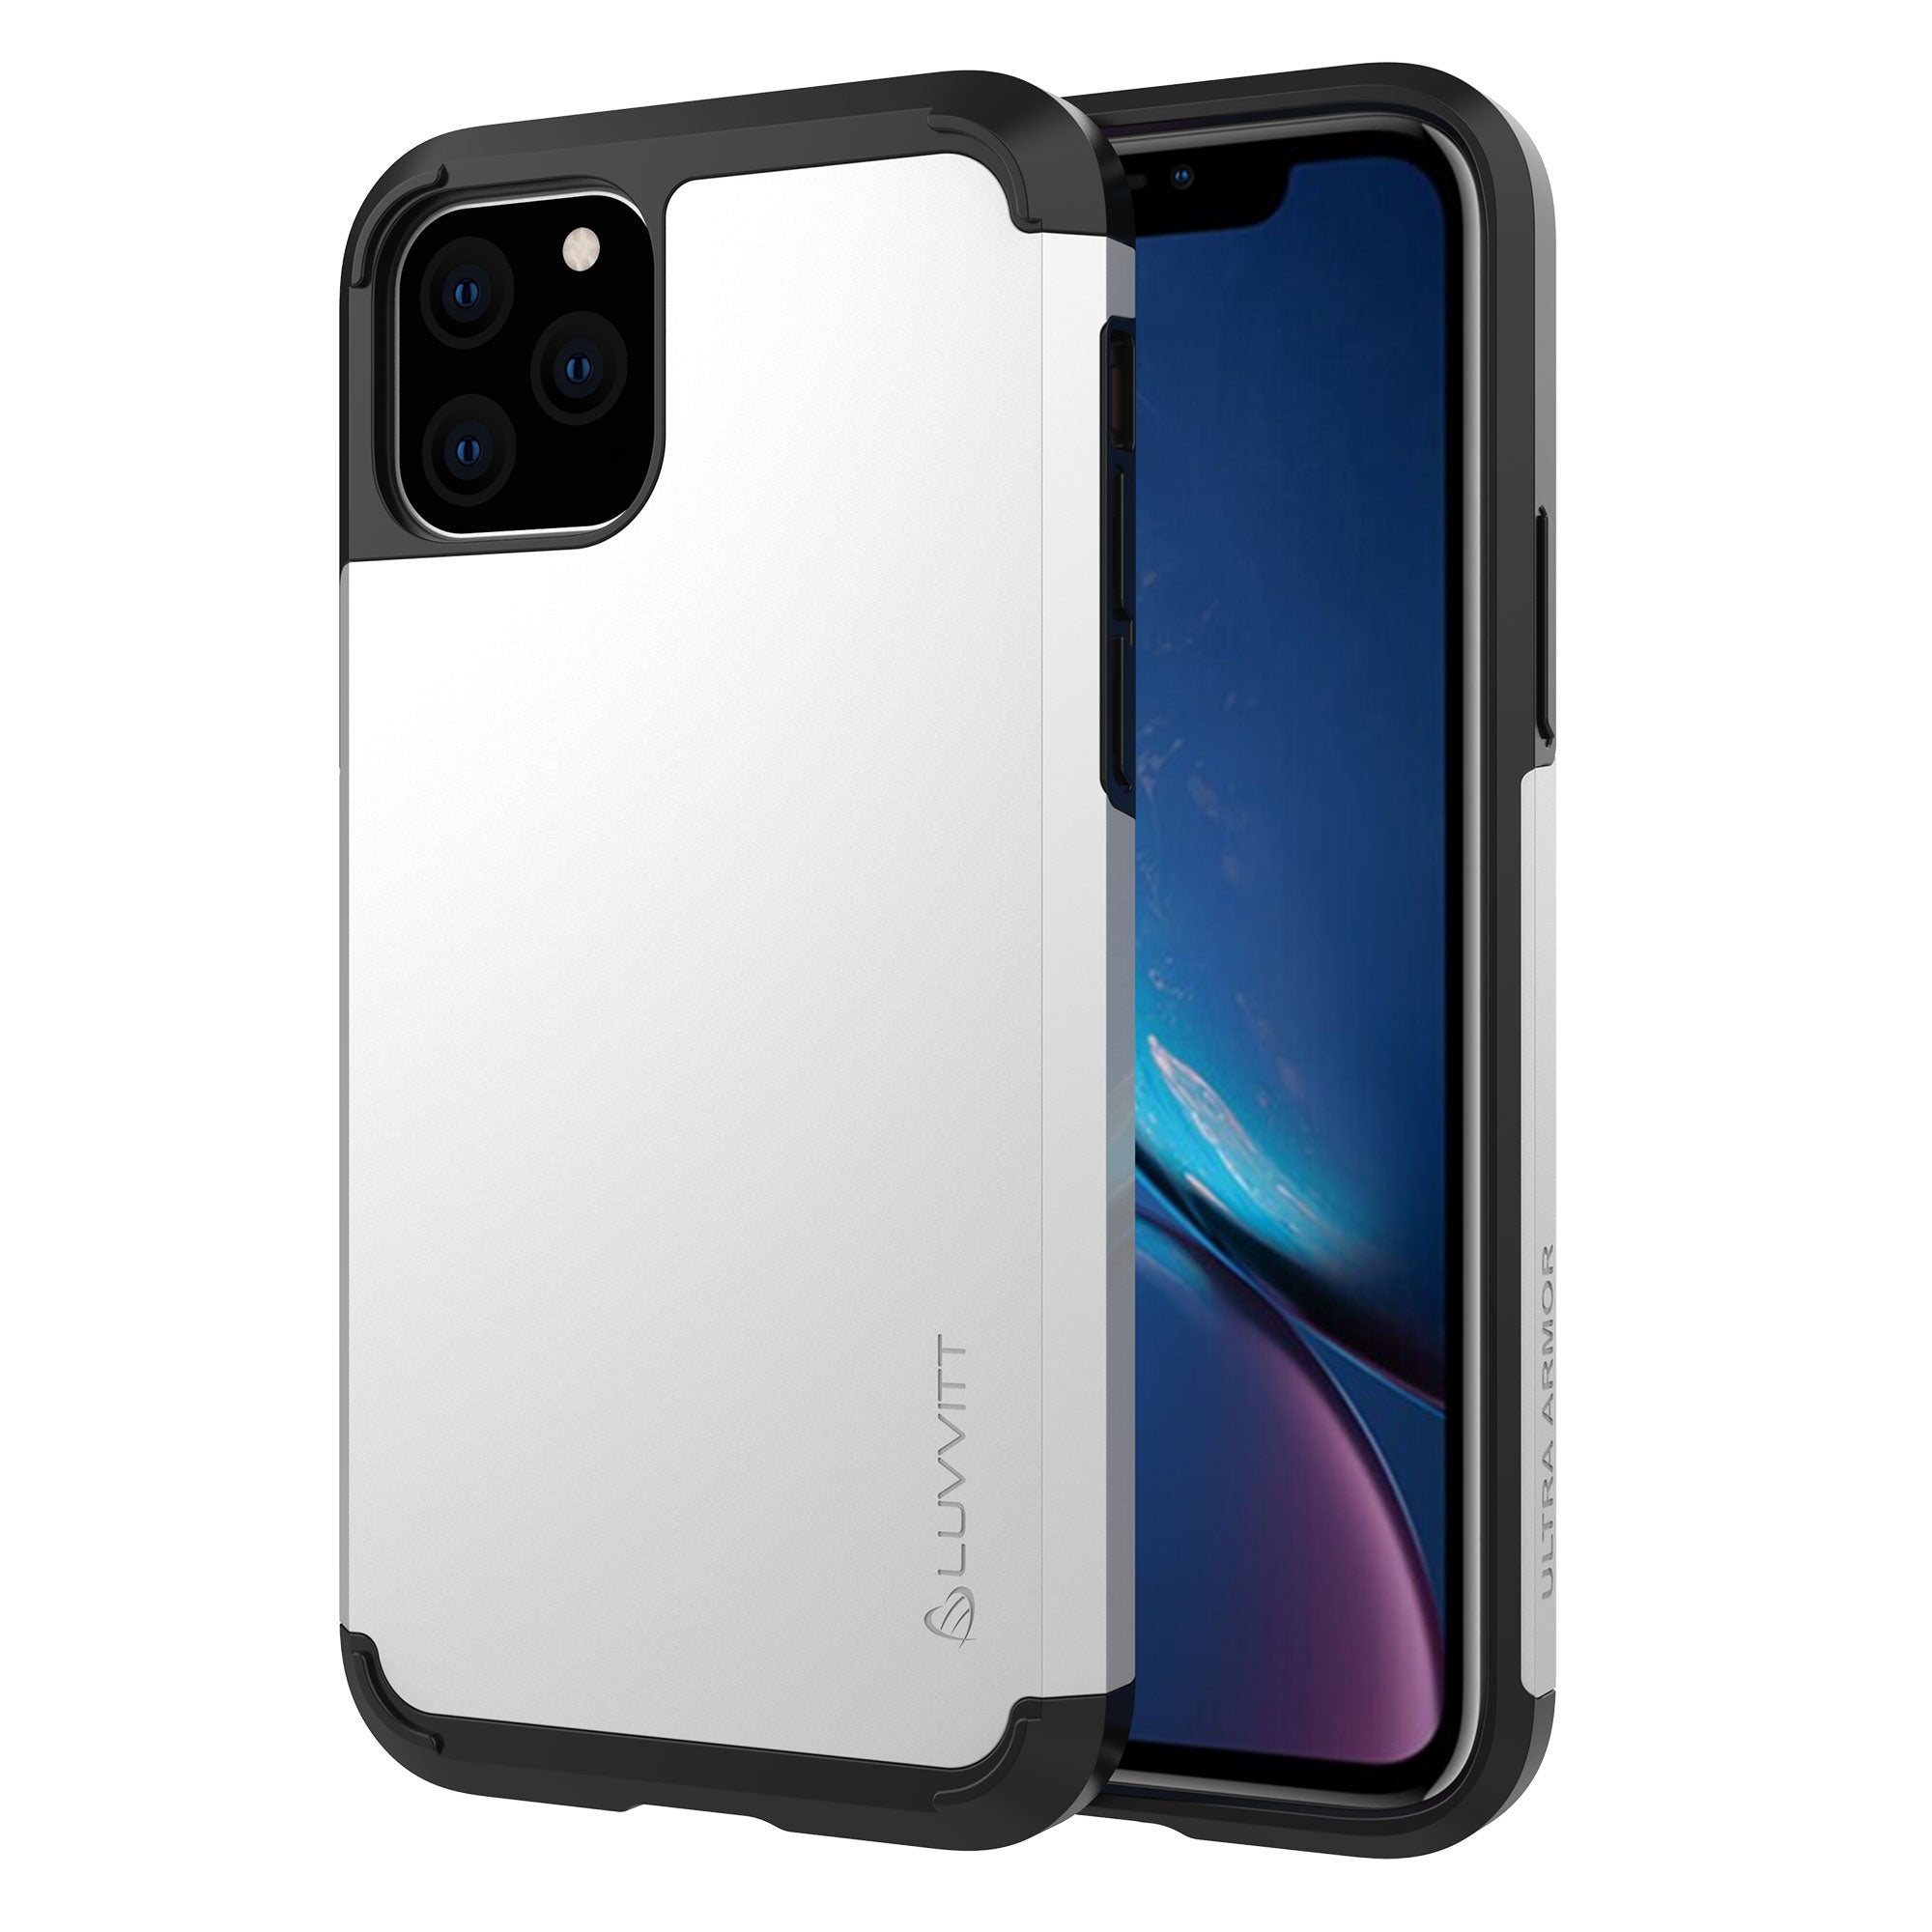 Luvvitt Ultra Armor Dual Layer Heavy Duty Case for iPhone 11 Pro 2019 - Silver